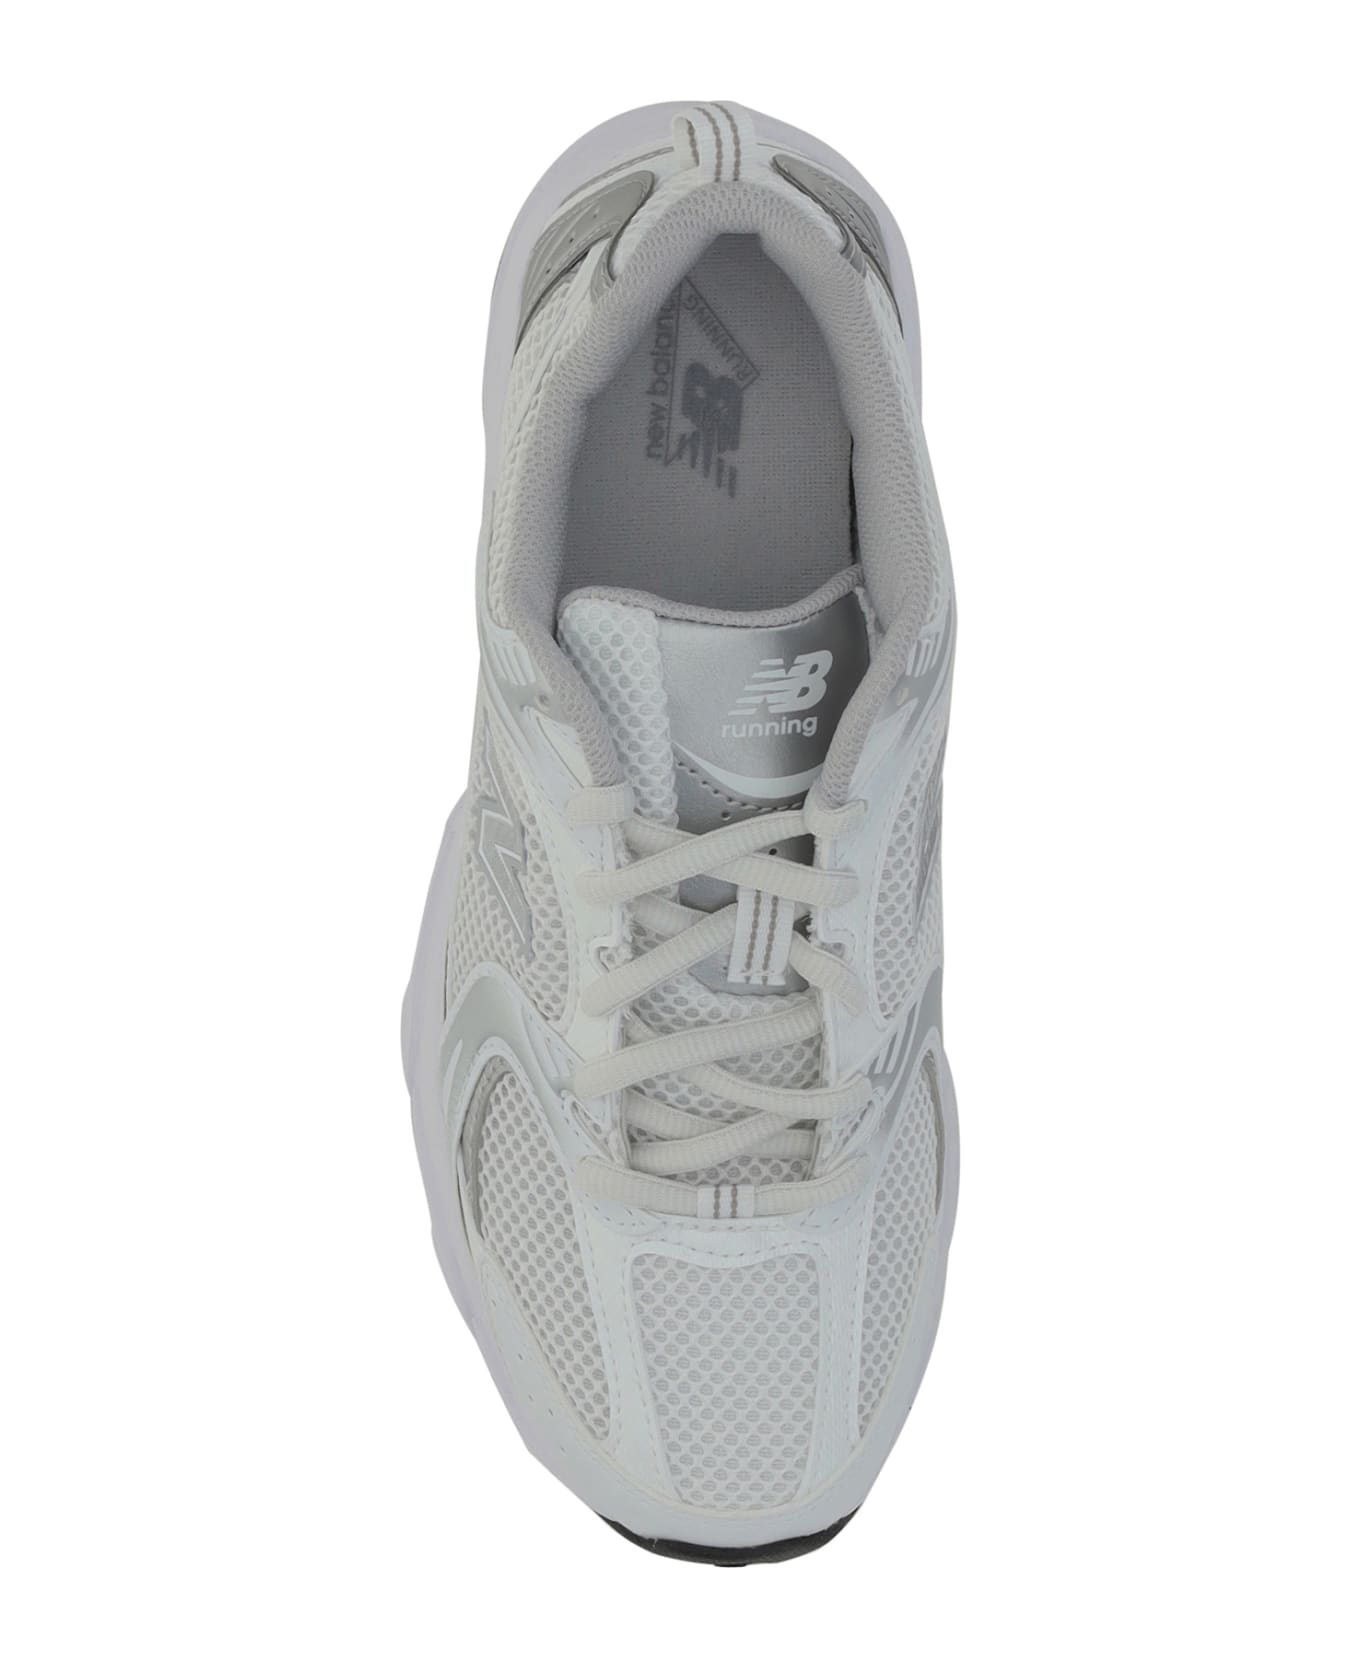 New Balance Lifestyle Sneakers - White/silver スニーカー